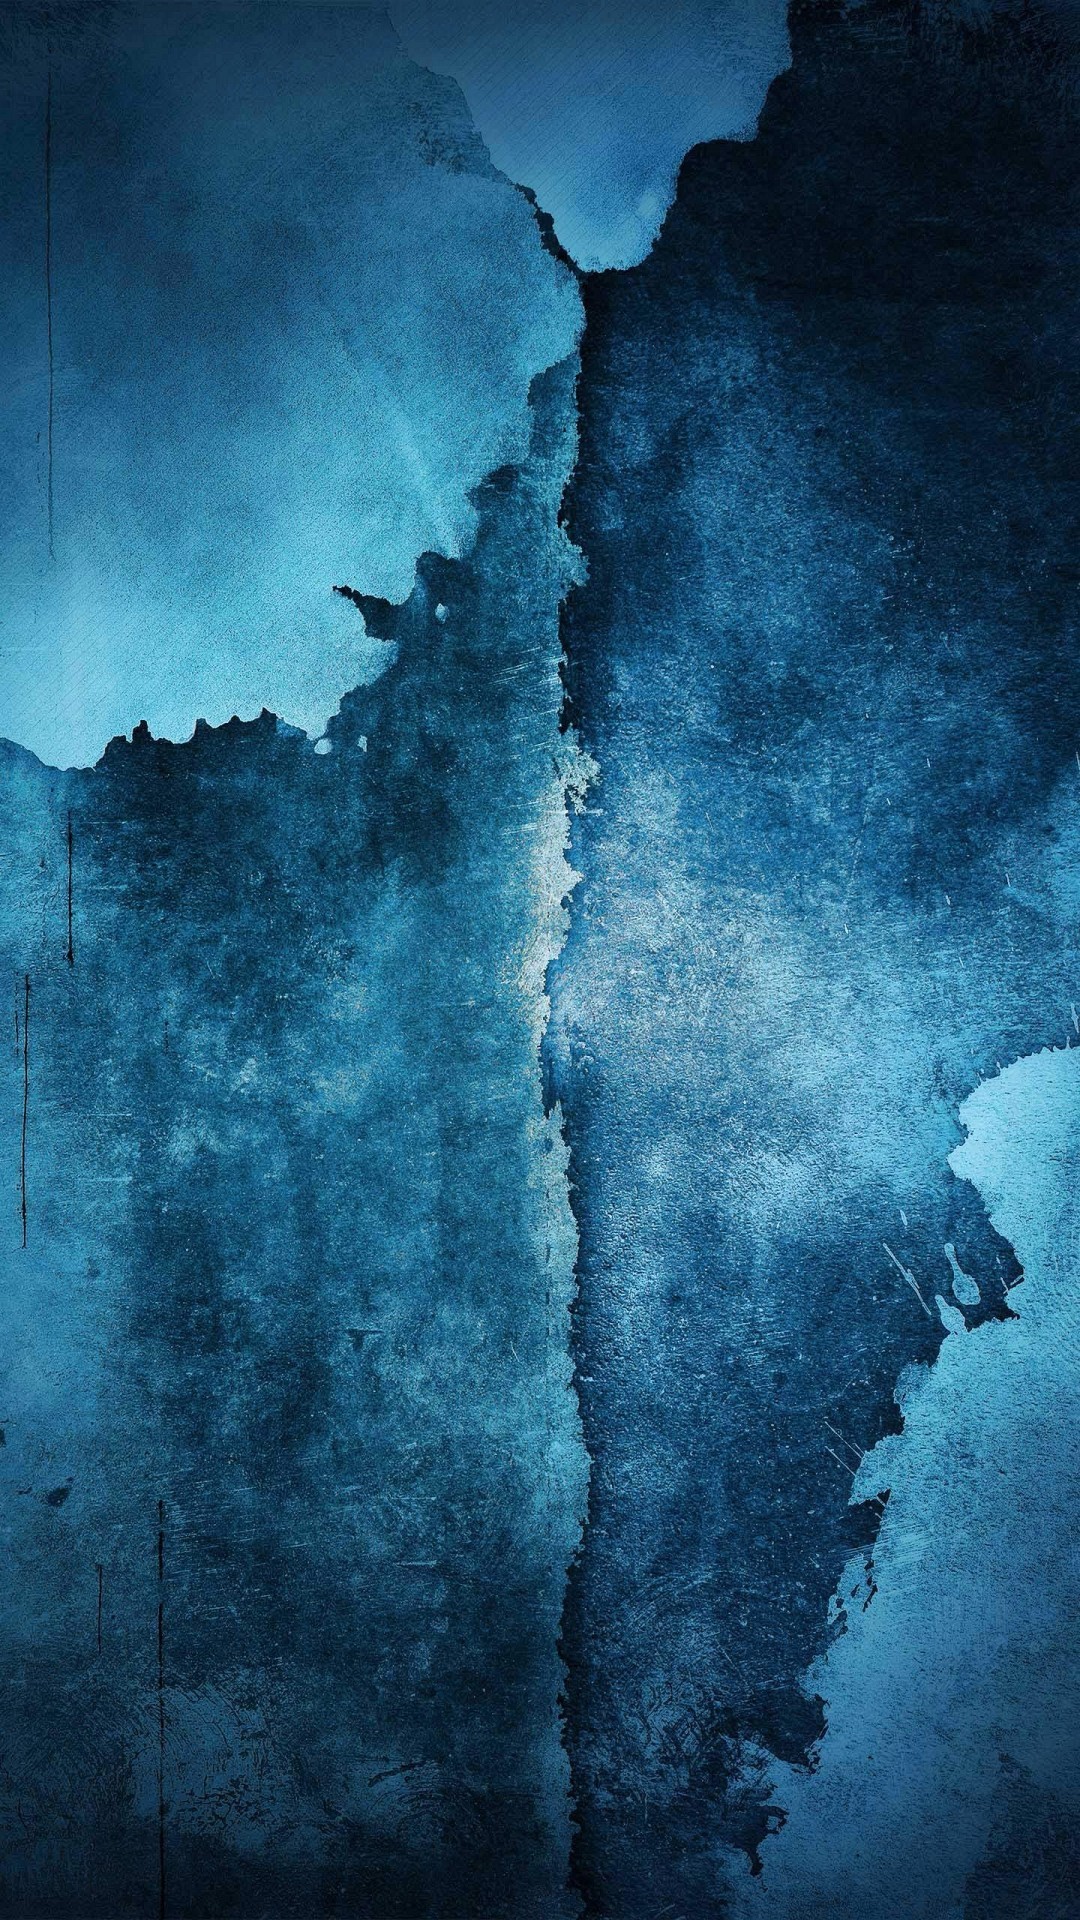 1080x1920 Wallpaper iphone 6 plus wall blue 5 5 inches